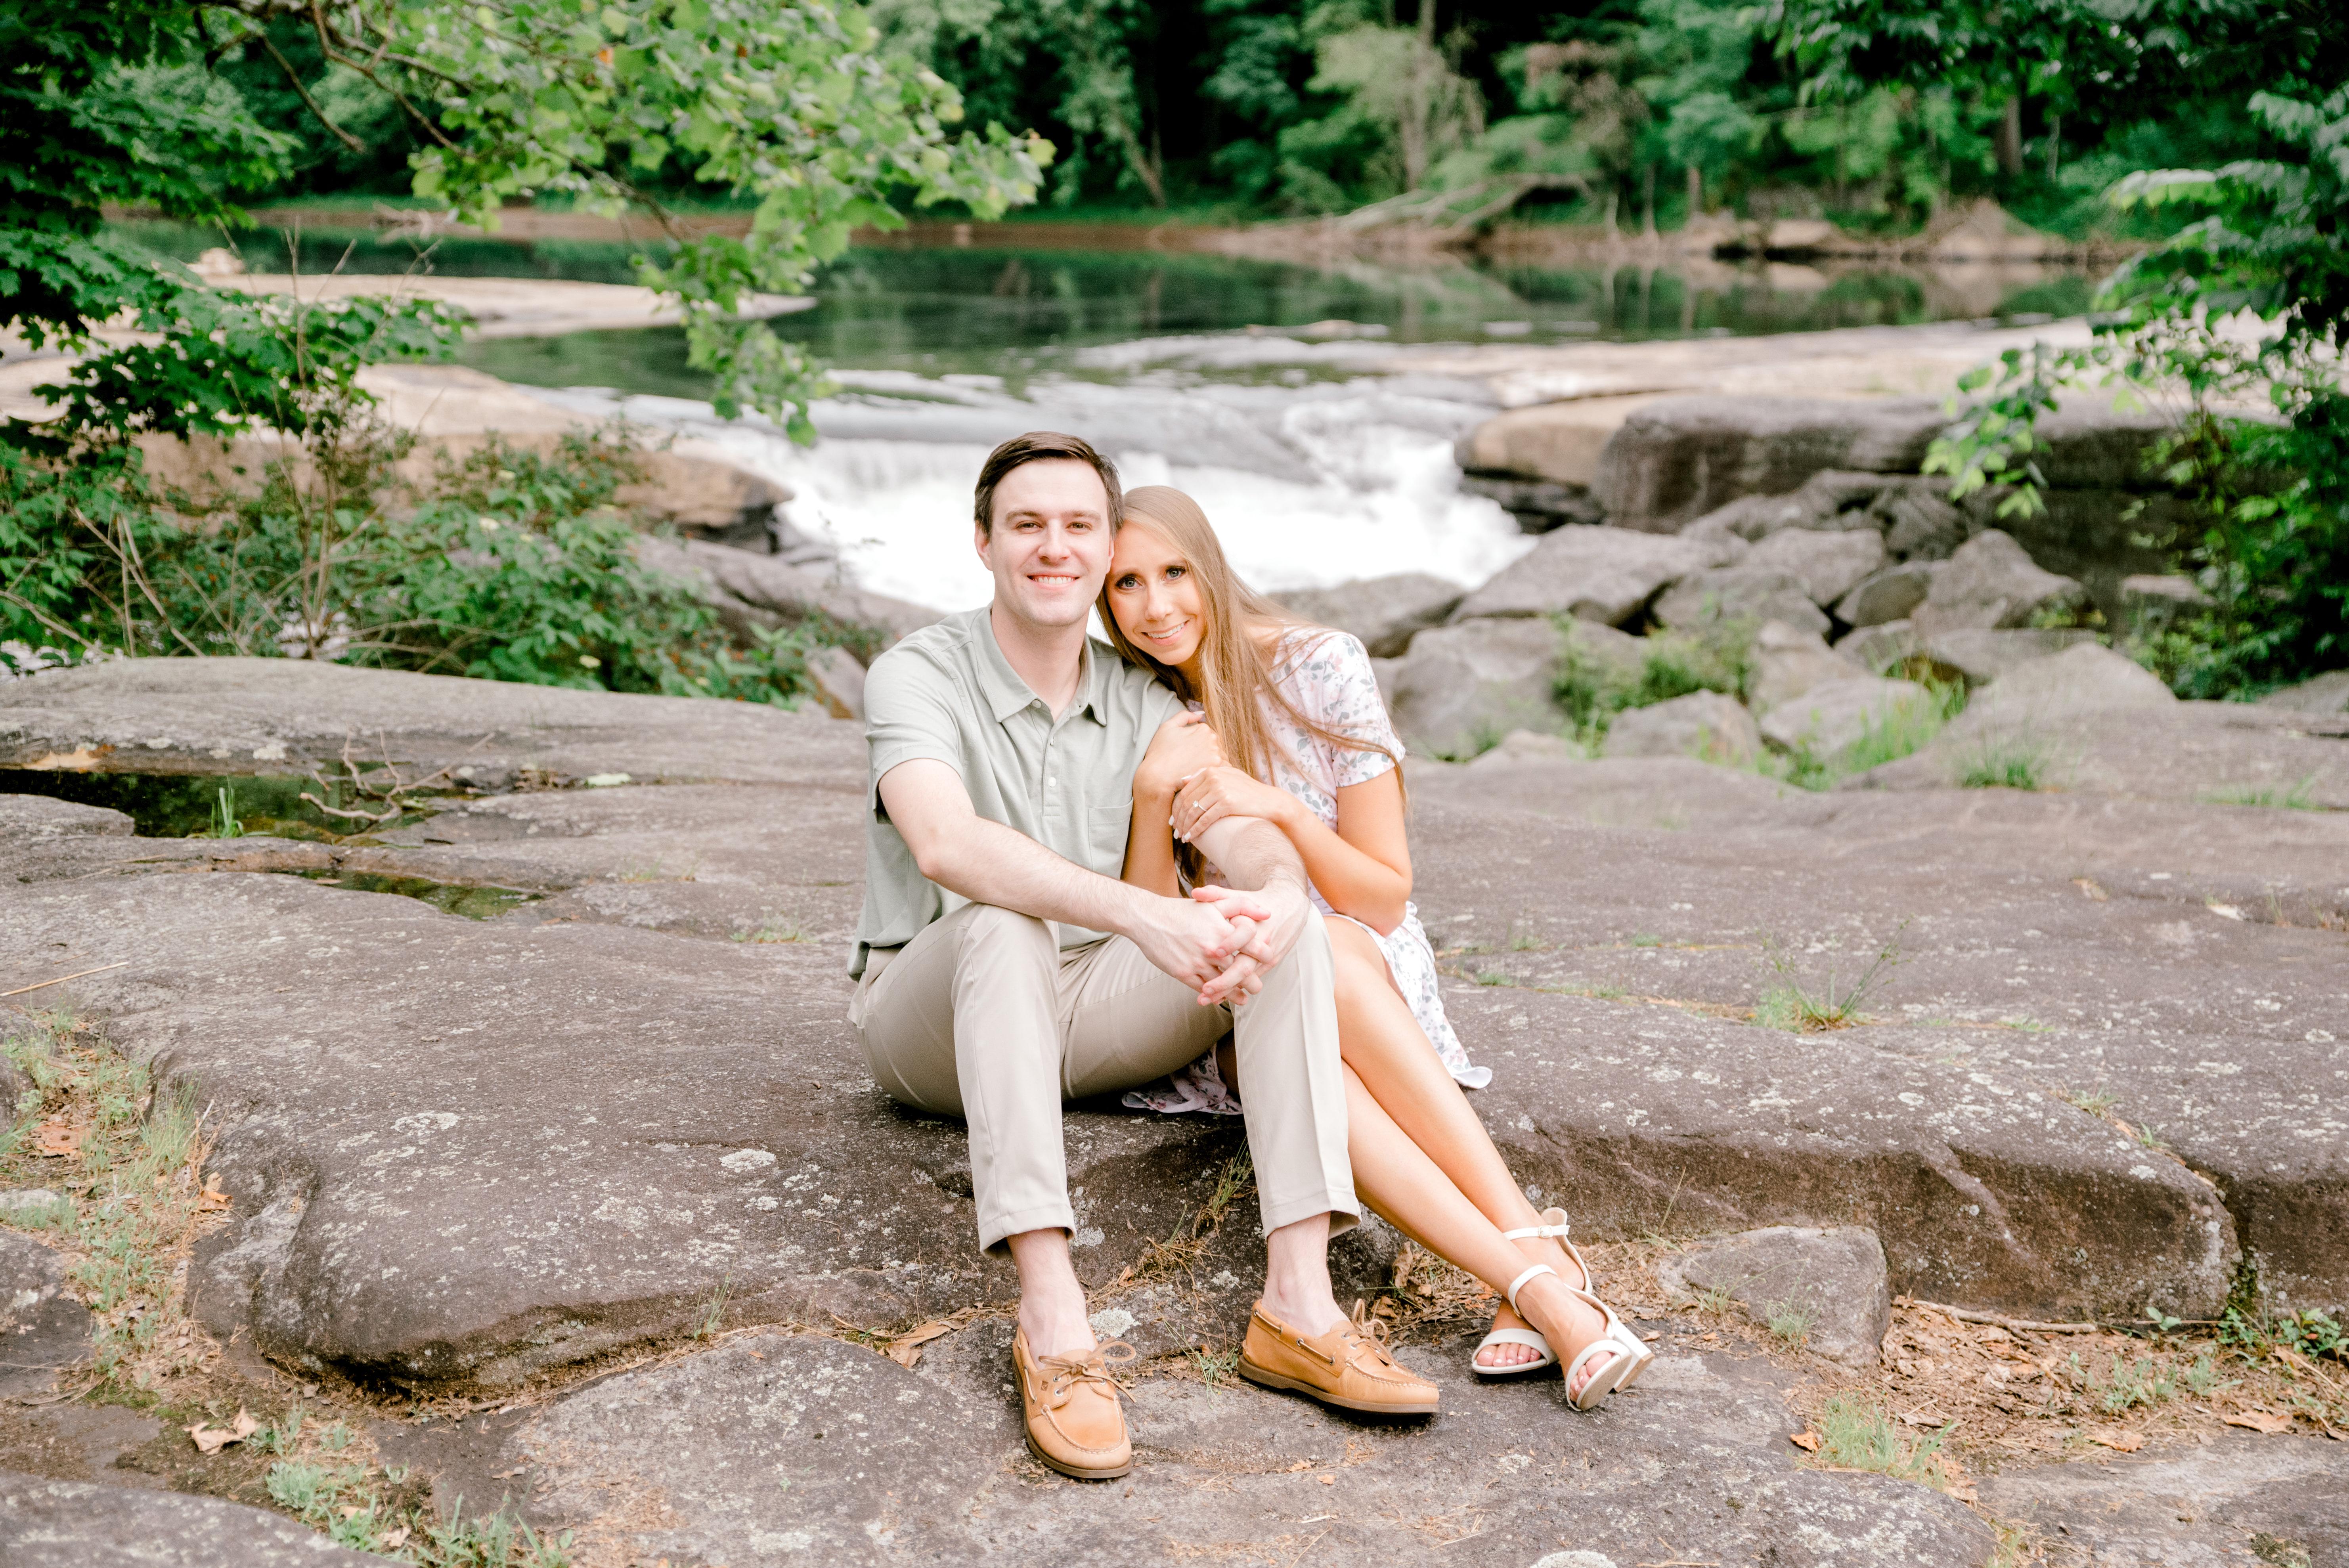 The Wedding Website of Kristen Nerbecki and Michael Duez